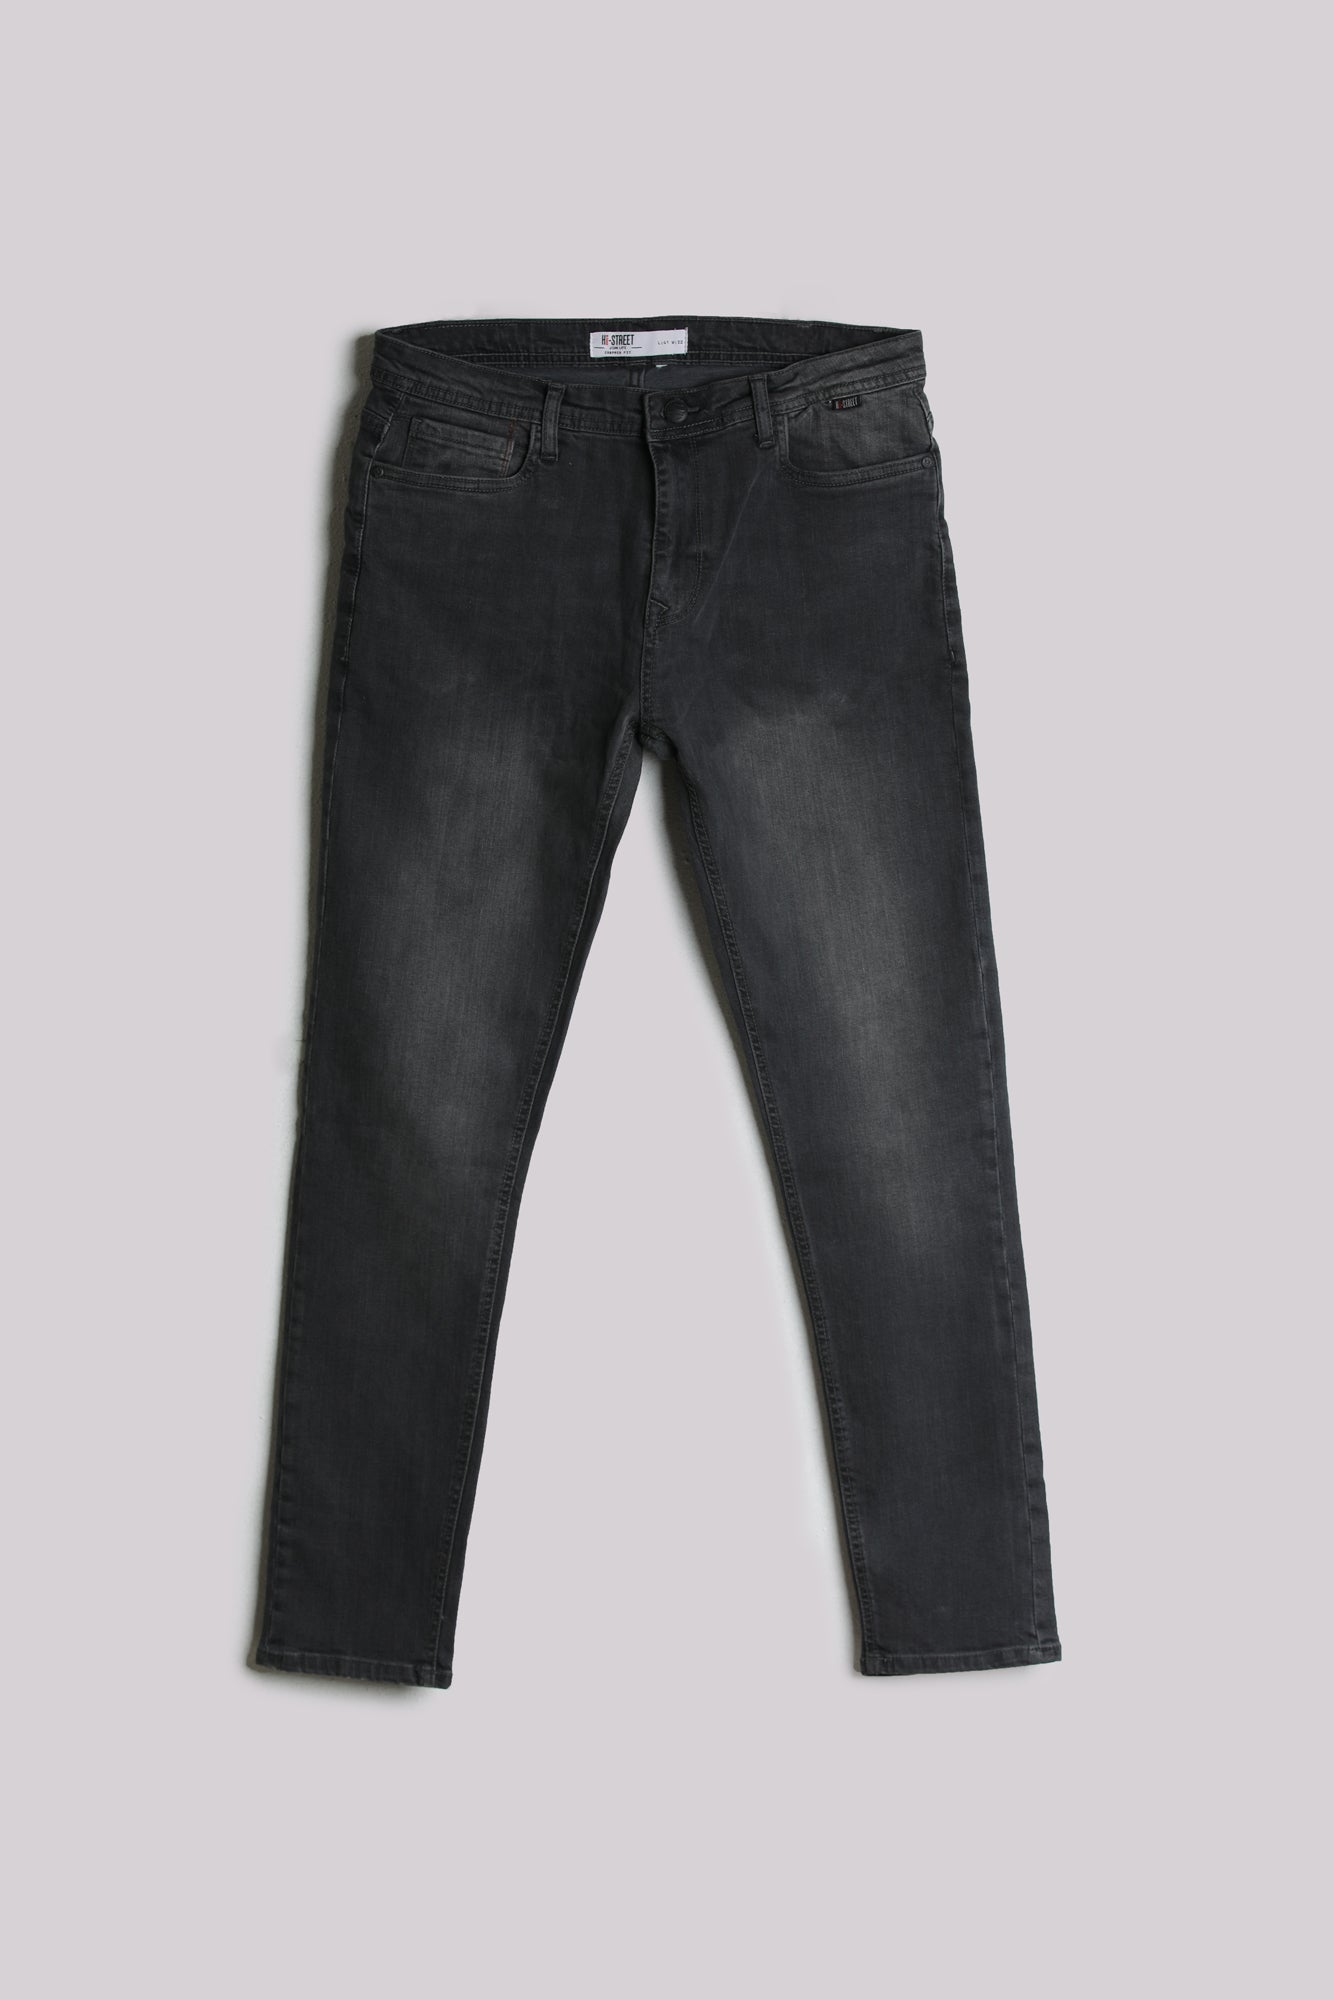 Black Faded Jeans